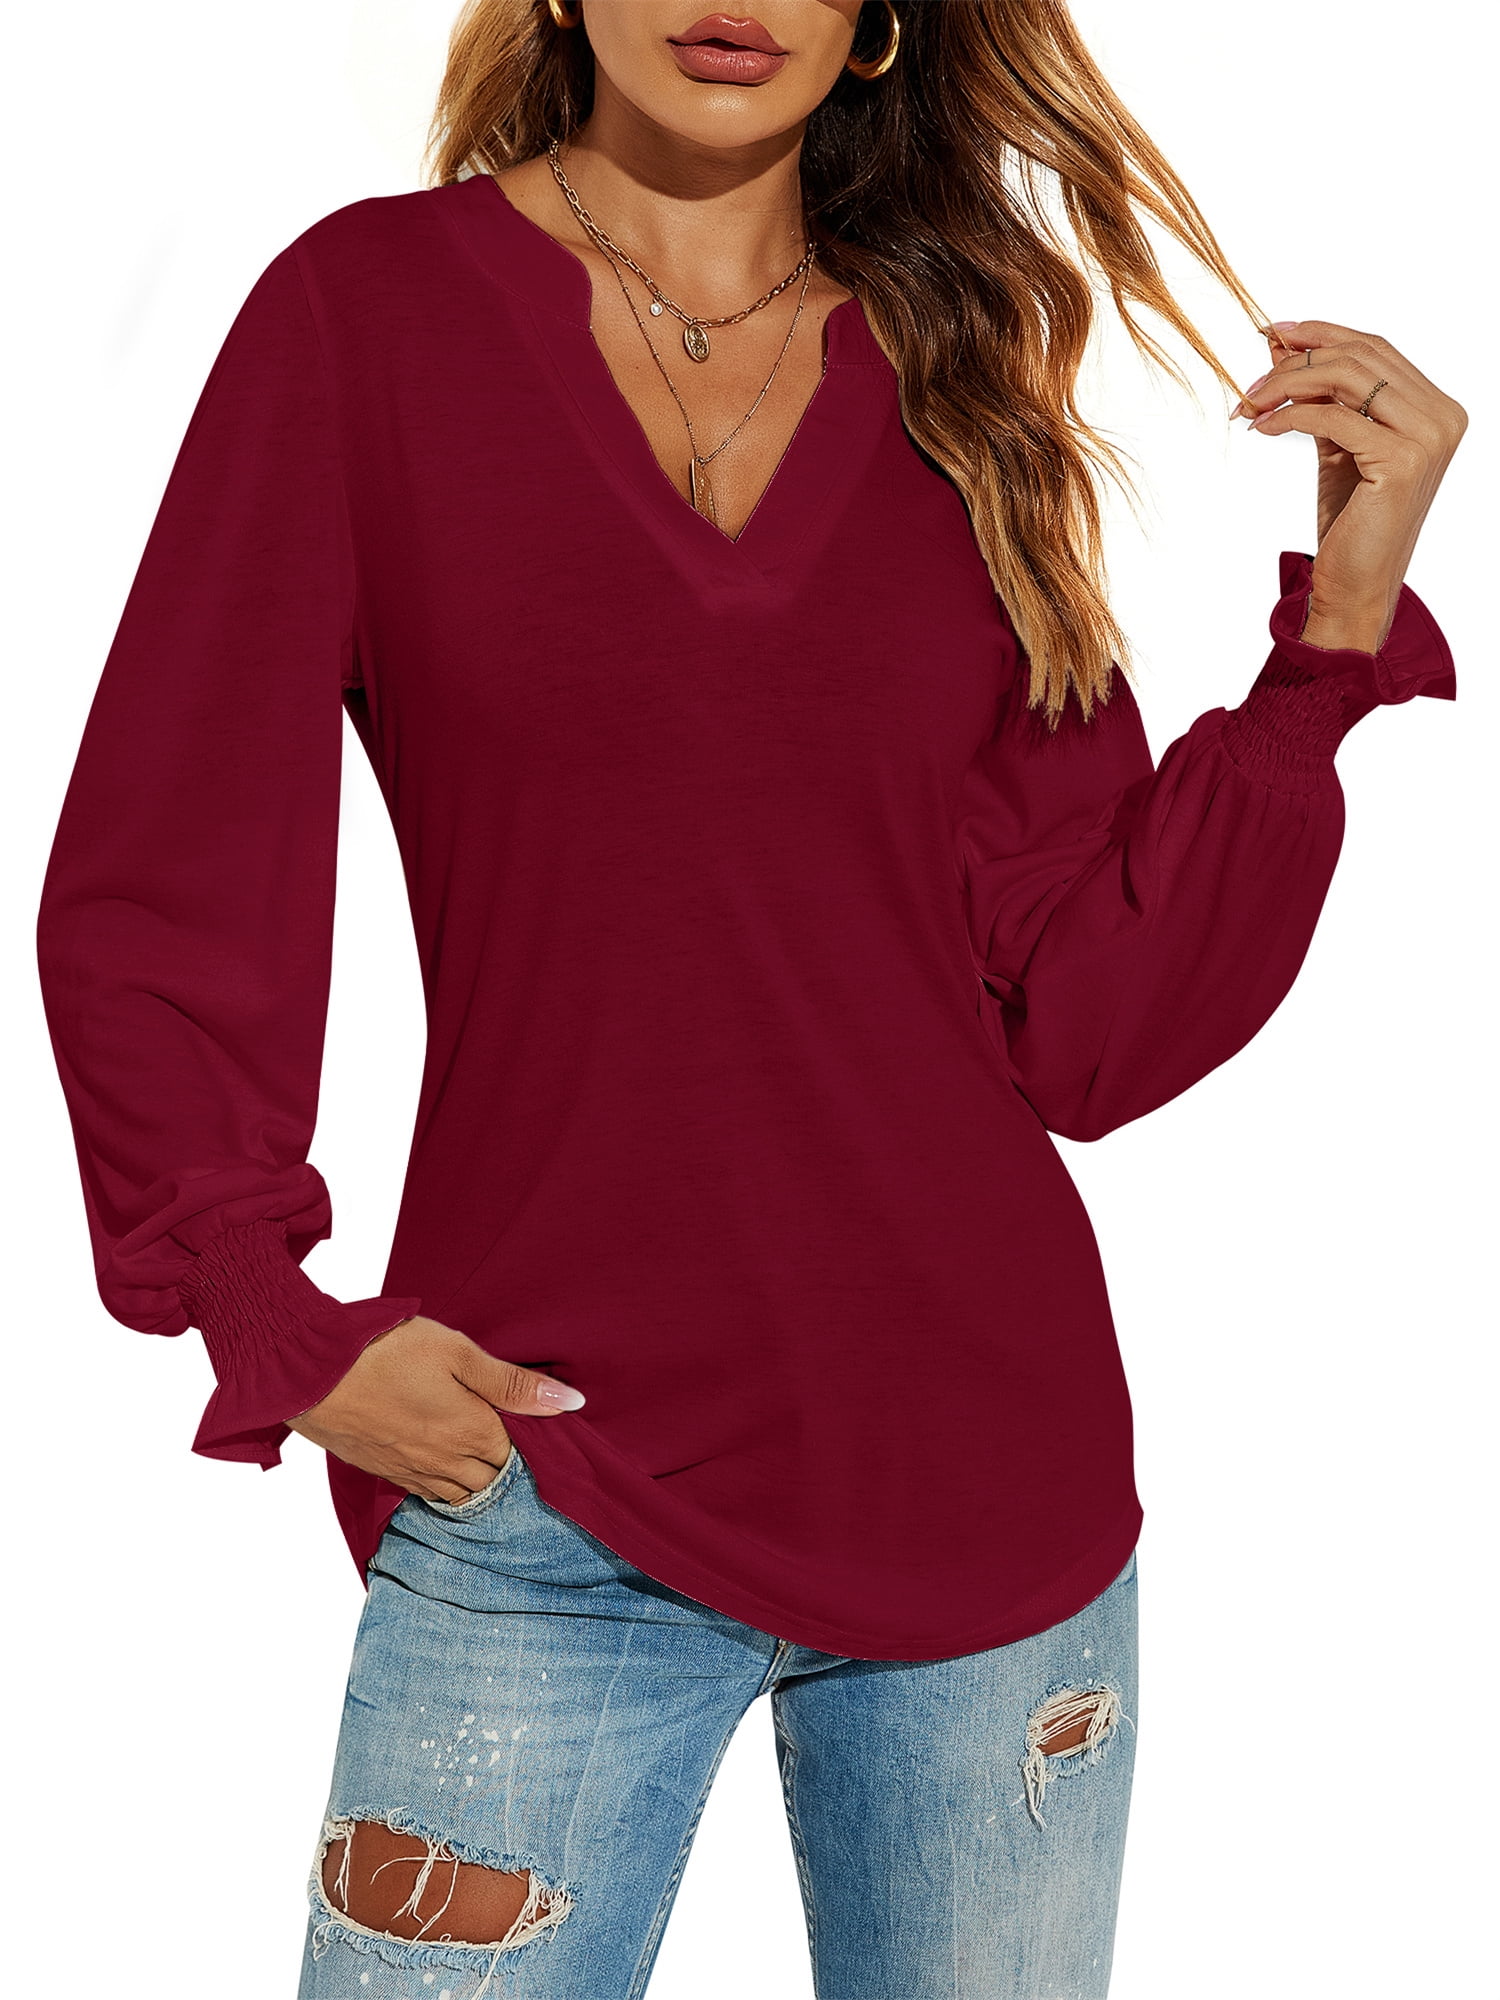 LOMON Women's Casual Puff Long Sleeve Tunic Tops V-Neck Pleated Flare  Blouse T-Shirts with Smocked Cuffs